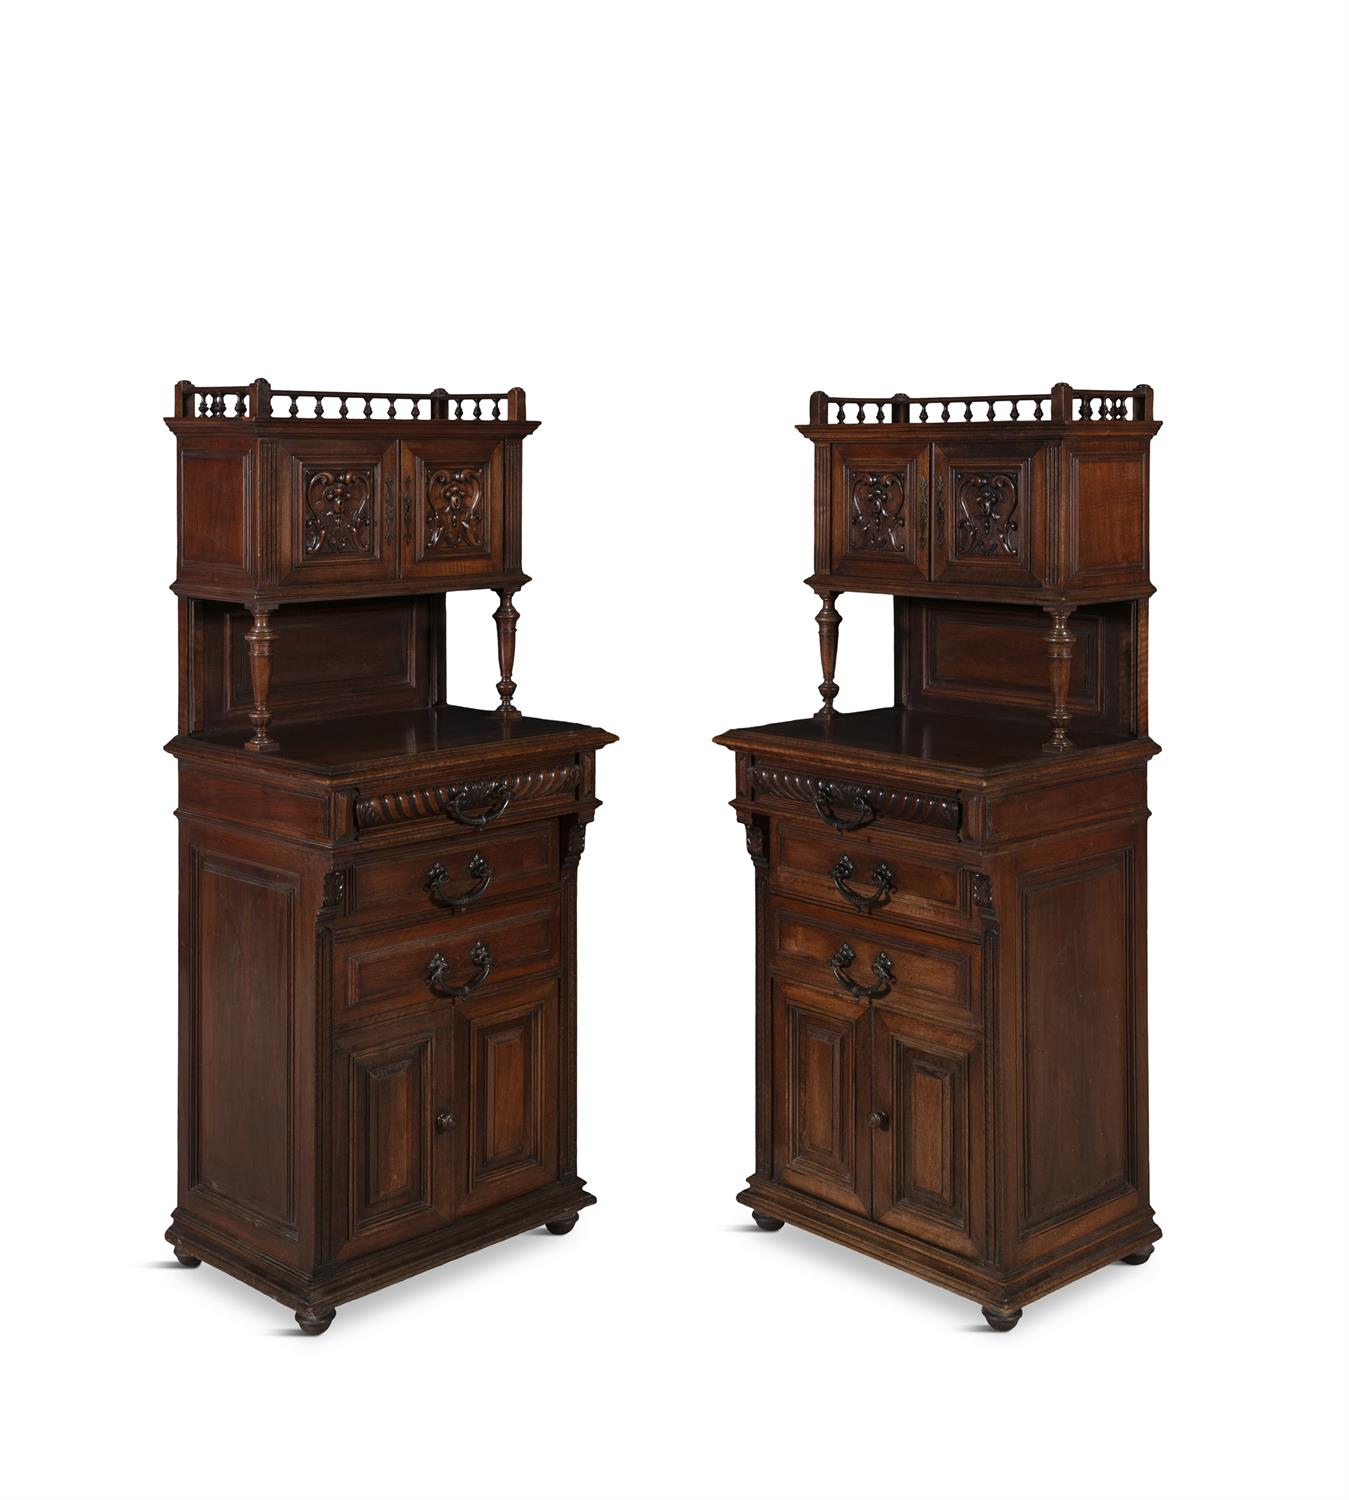 A PAIR OF 19TH CENTURY FRENCH CARVED WALNUT SIDE CABINETS BY C.H. JEANSELME & CO. (PARIS), C. - Image 2 of 5